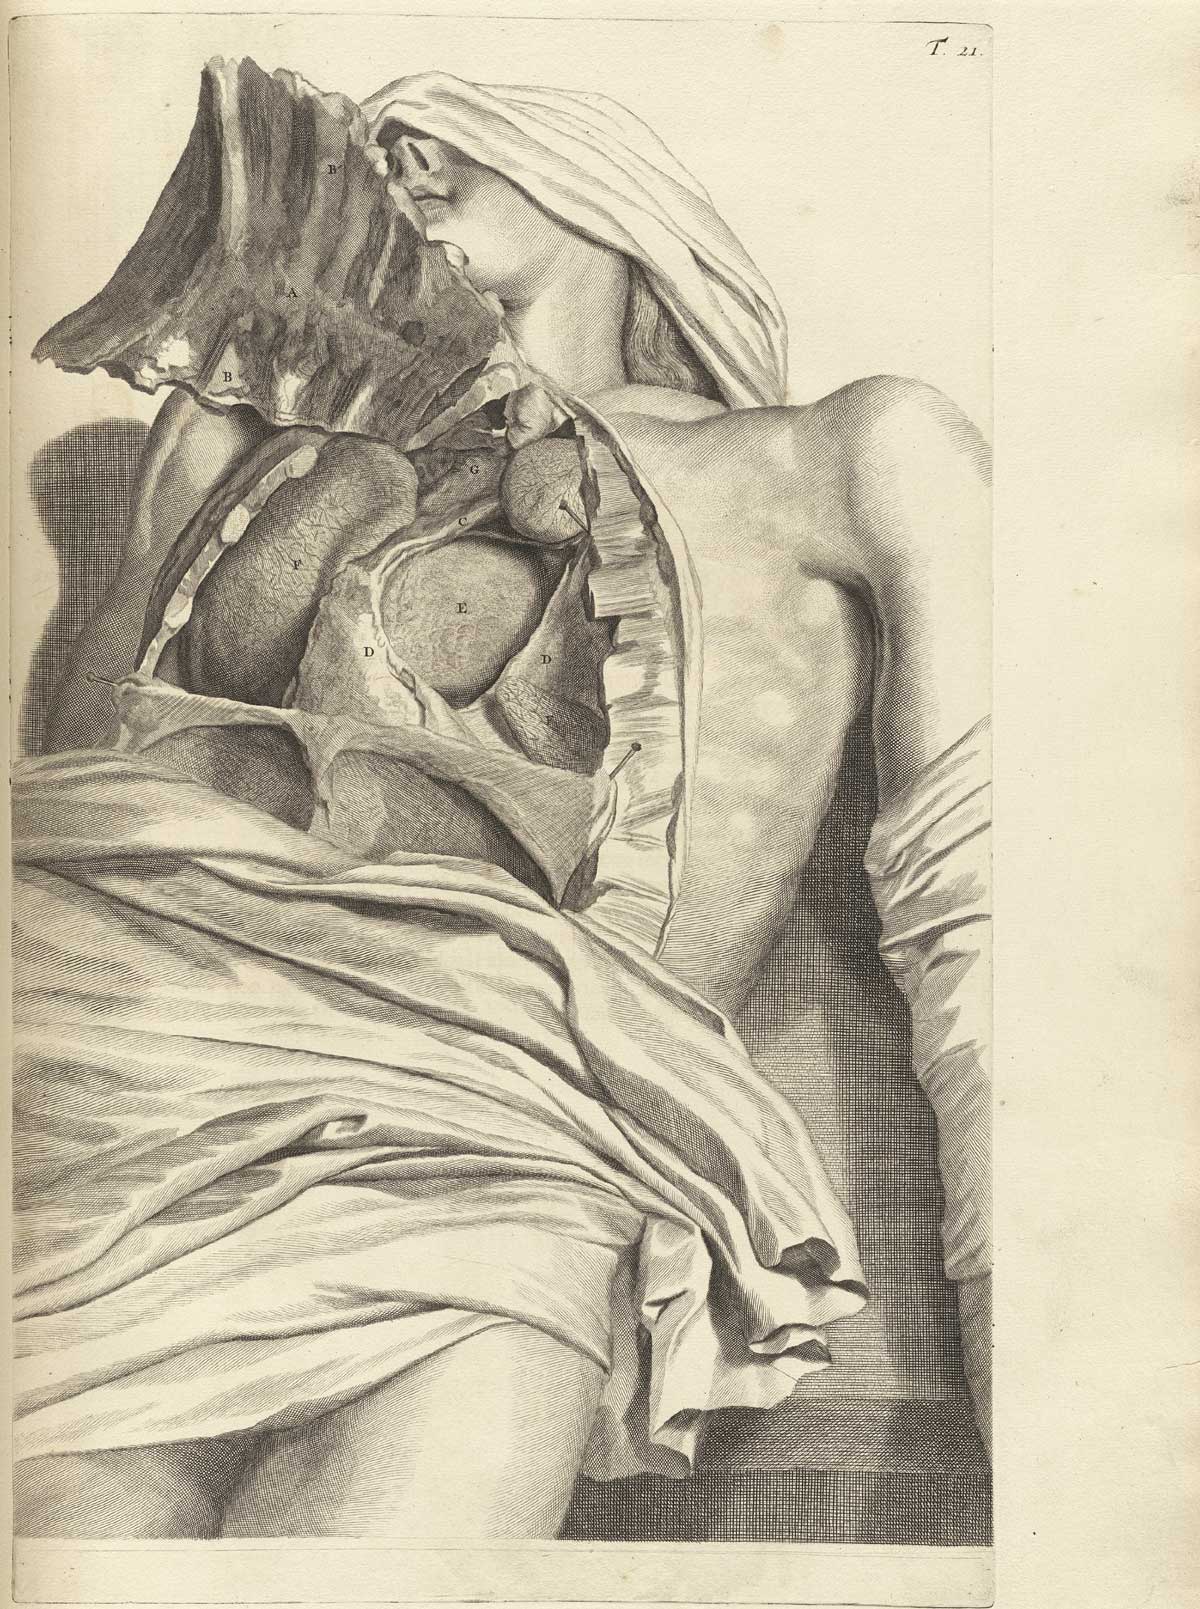 Engraving of an exposed thoracic cavity, probably male, with the sternum detached at the bottom and lifted up, exposing the diaphragm, lungs, heart, and pericardium; the lower portion of the cadaver’s abdomen is covered with a sheet with the legs descending below out of sight; from Govard Bidloo’s Ontleding Des Menschelyken Lichaams, Amsterdam, 1690, NLM Call no. WZ 250 B5855anDu 1690.